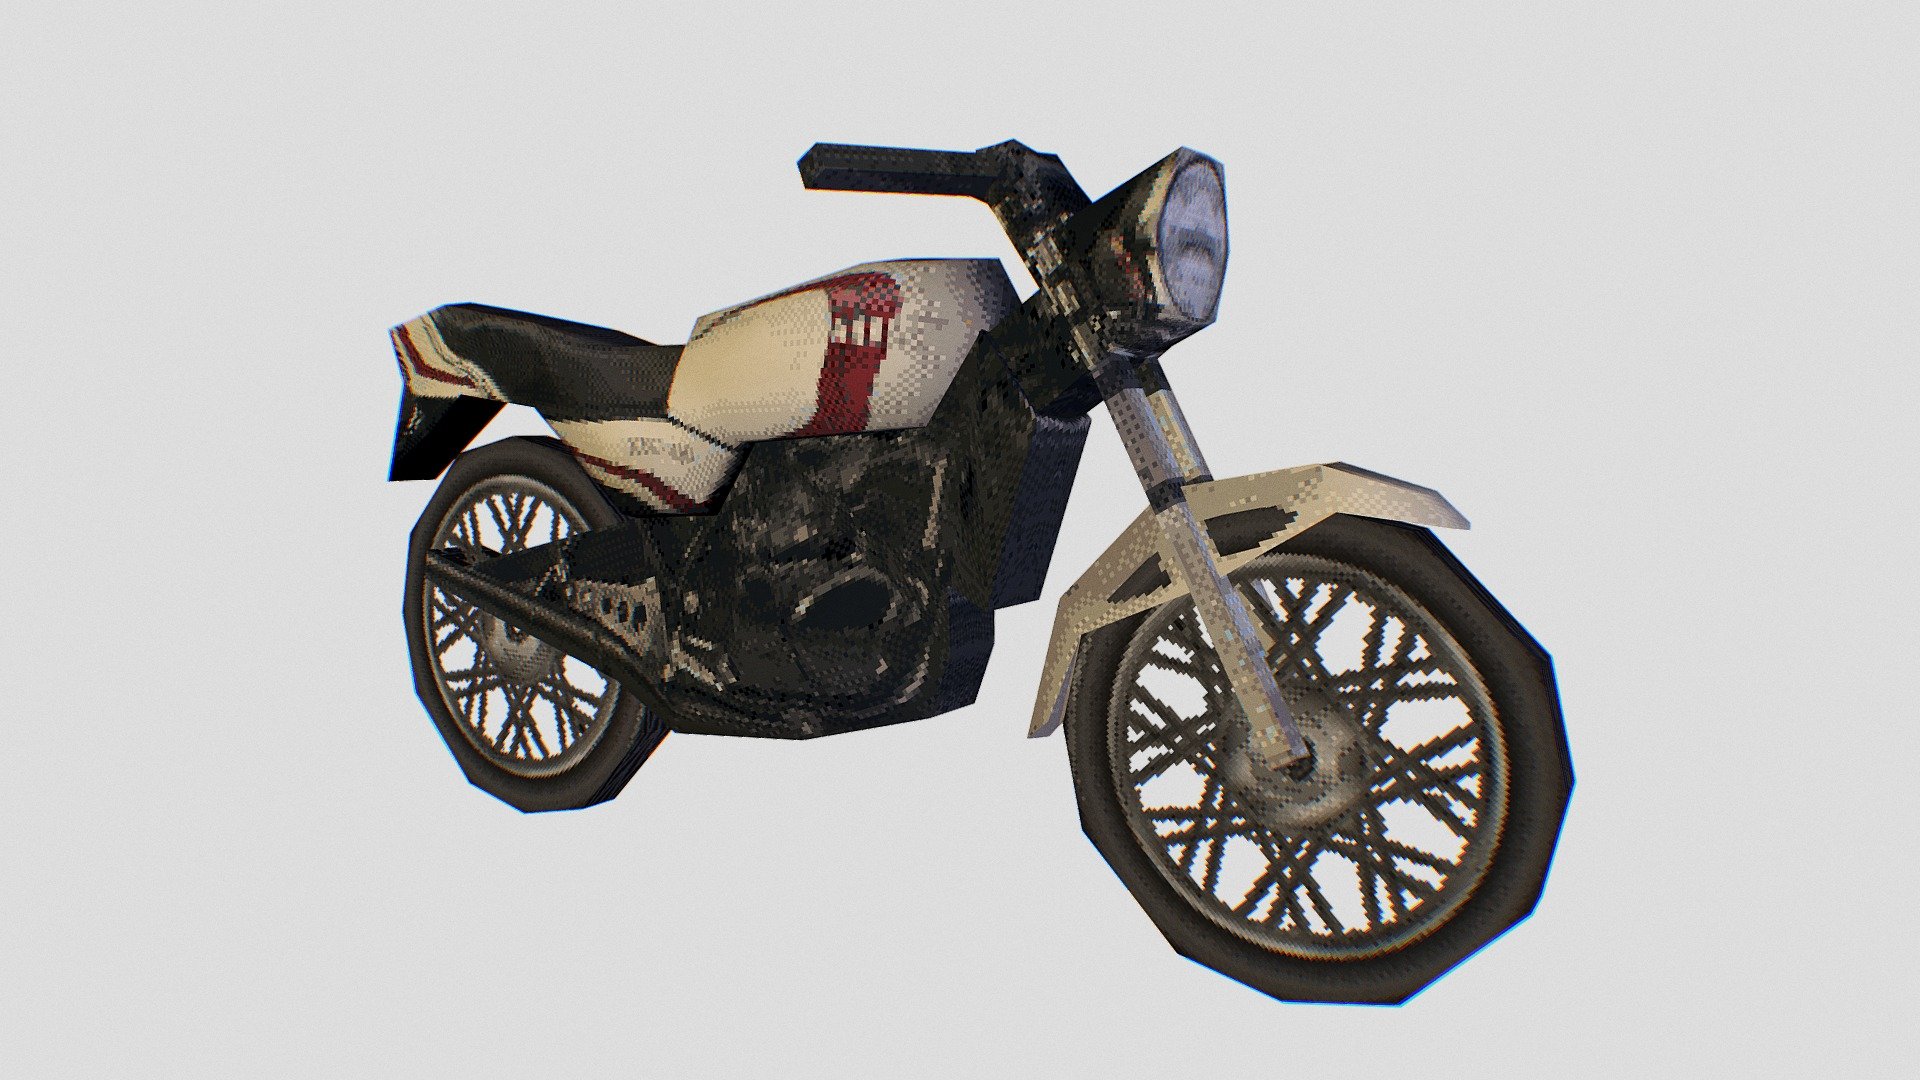 A sports motorbike

Designed for retro inspired projects or mobile games.

My YouTube channel where I document my game dev journey - https://www.youtube.com/@AaronMYoung Contact me on - Aaronmyoung94@gmail.com - PS1 Style Asset - Motorbike - 3D model by AaronMYoung 3d model